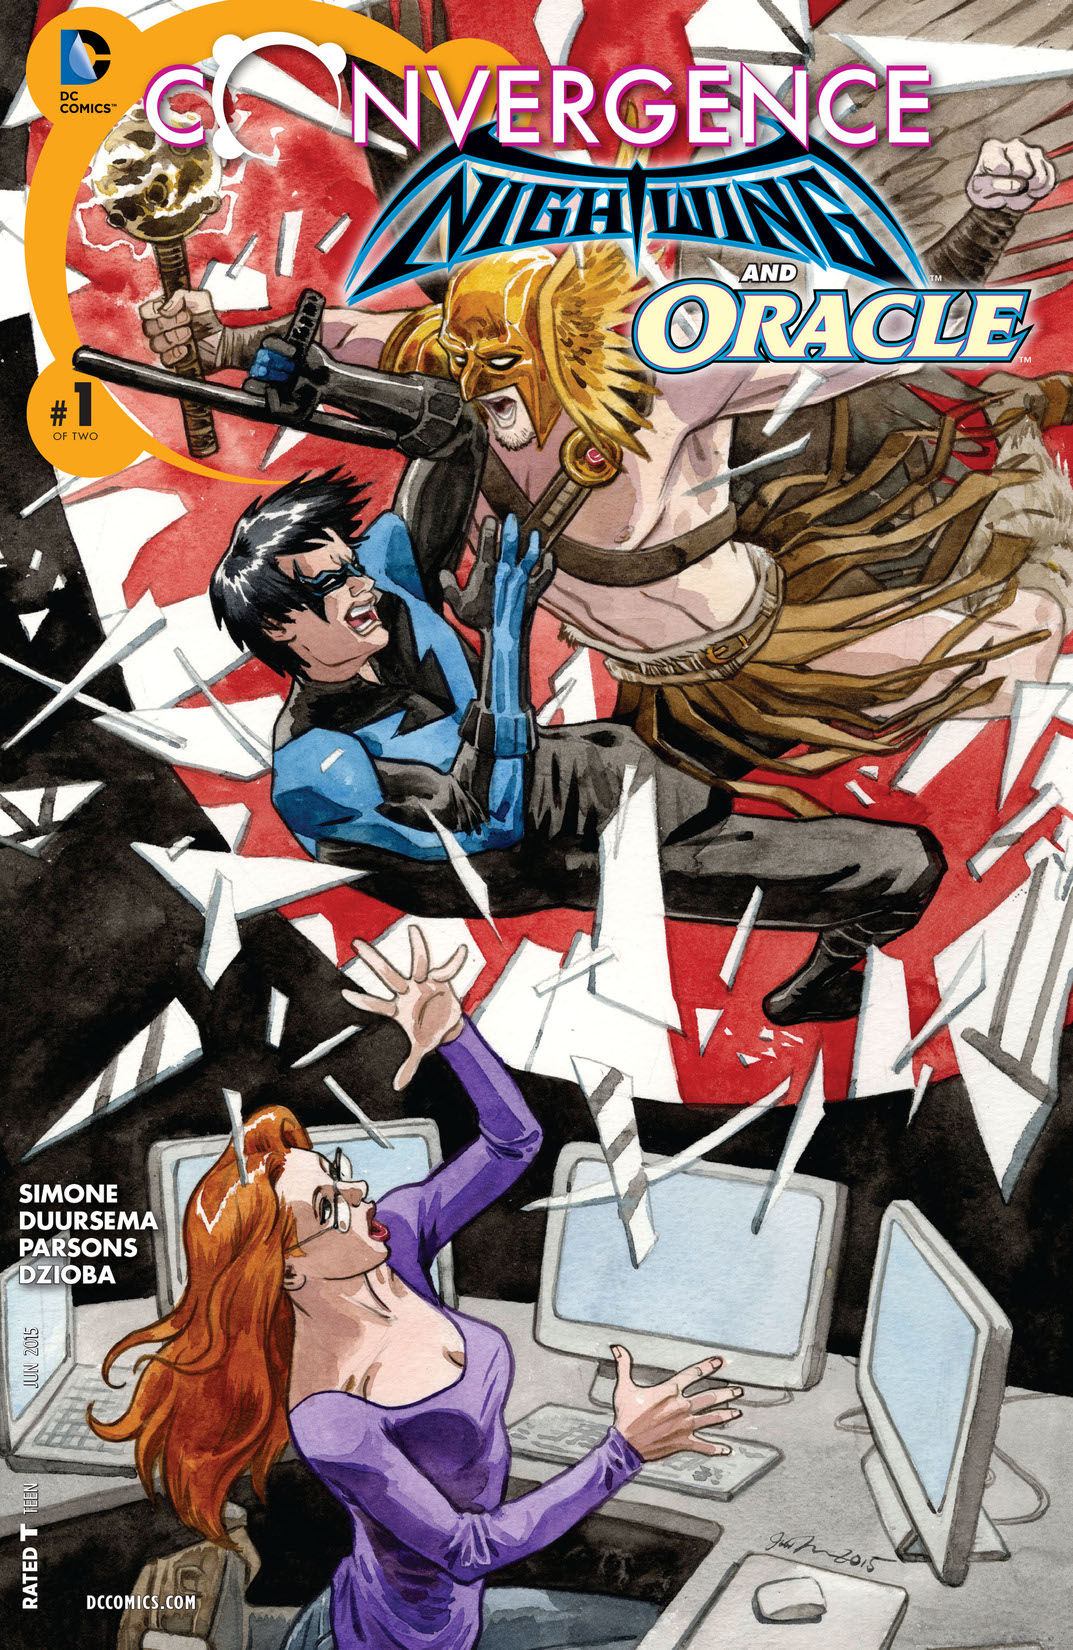 Convergence: Nightwing/Oracle #1 preview images